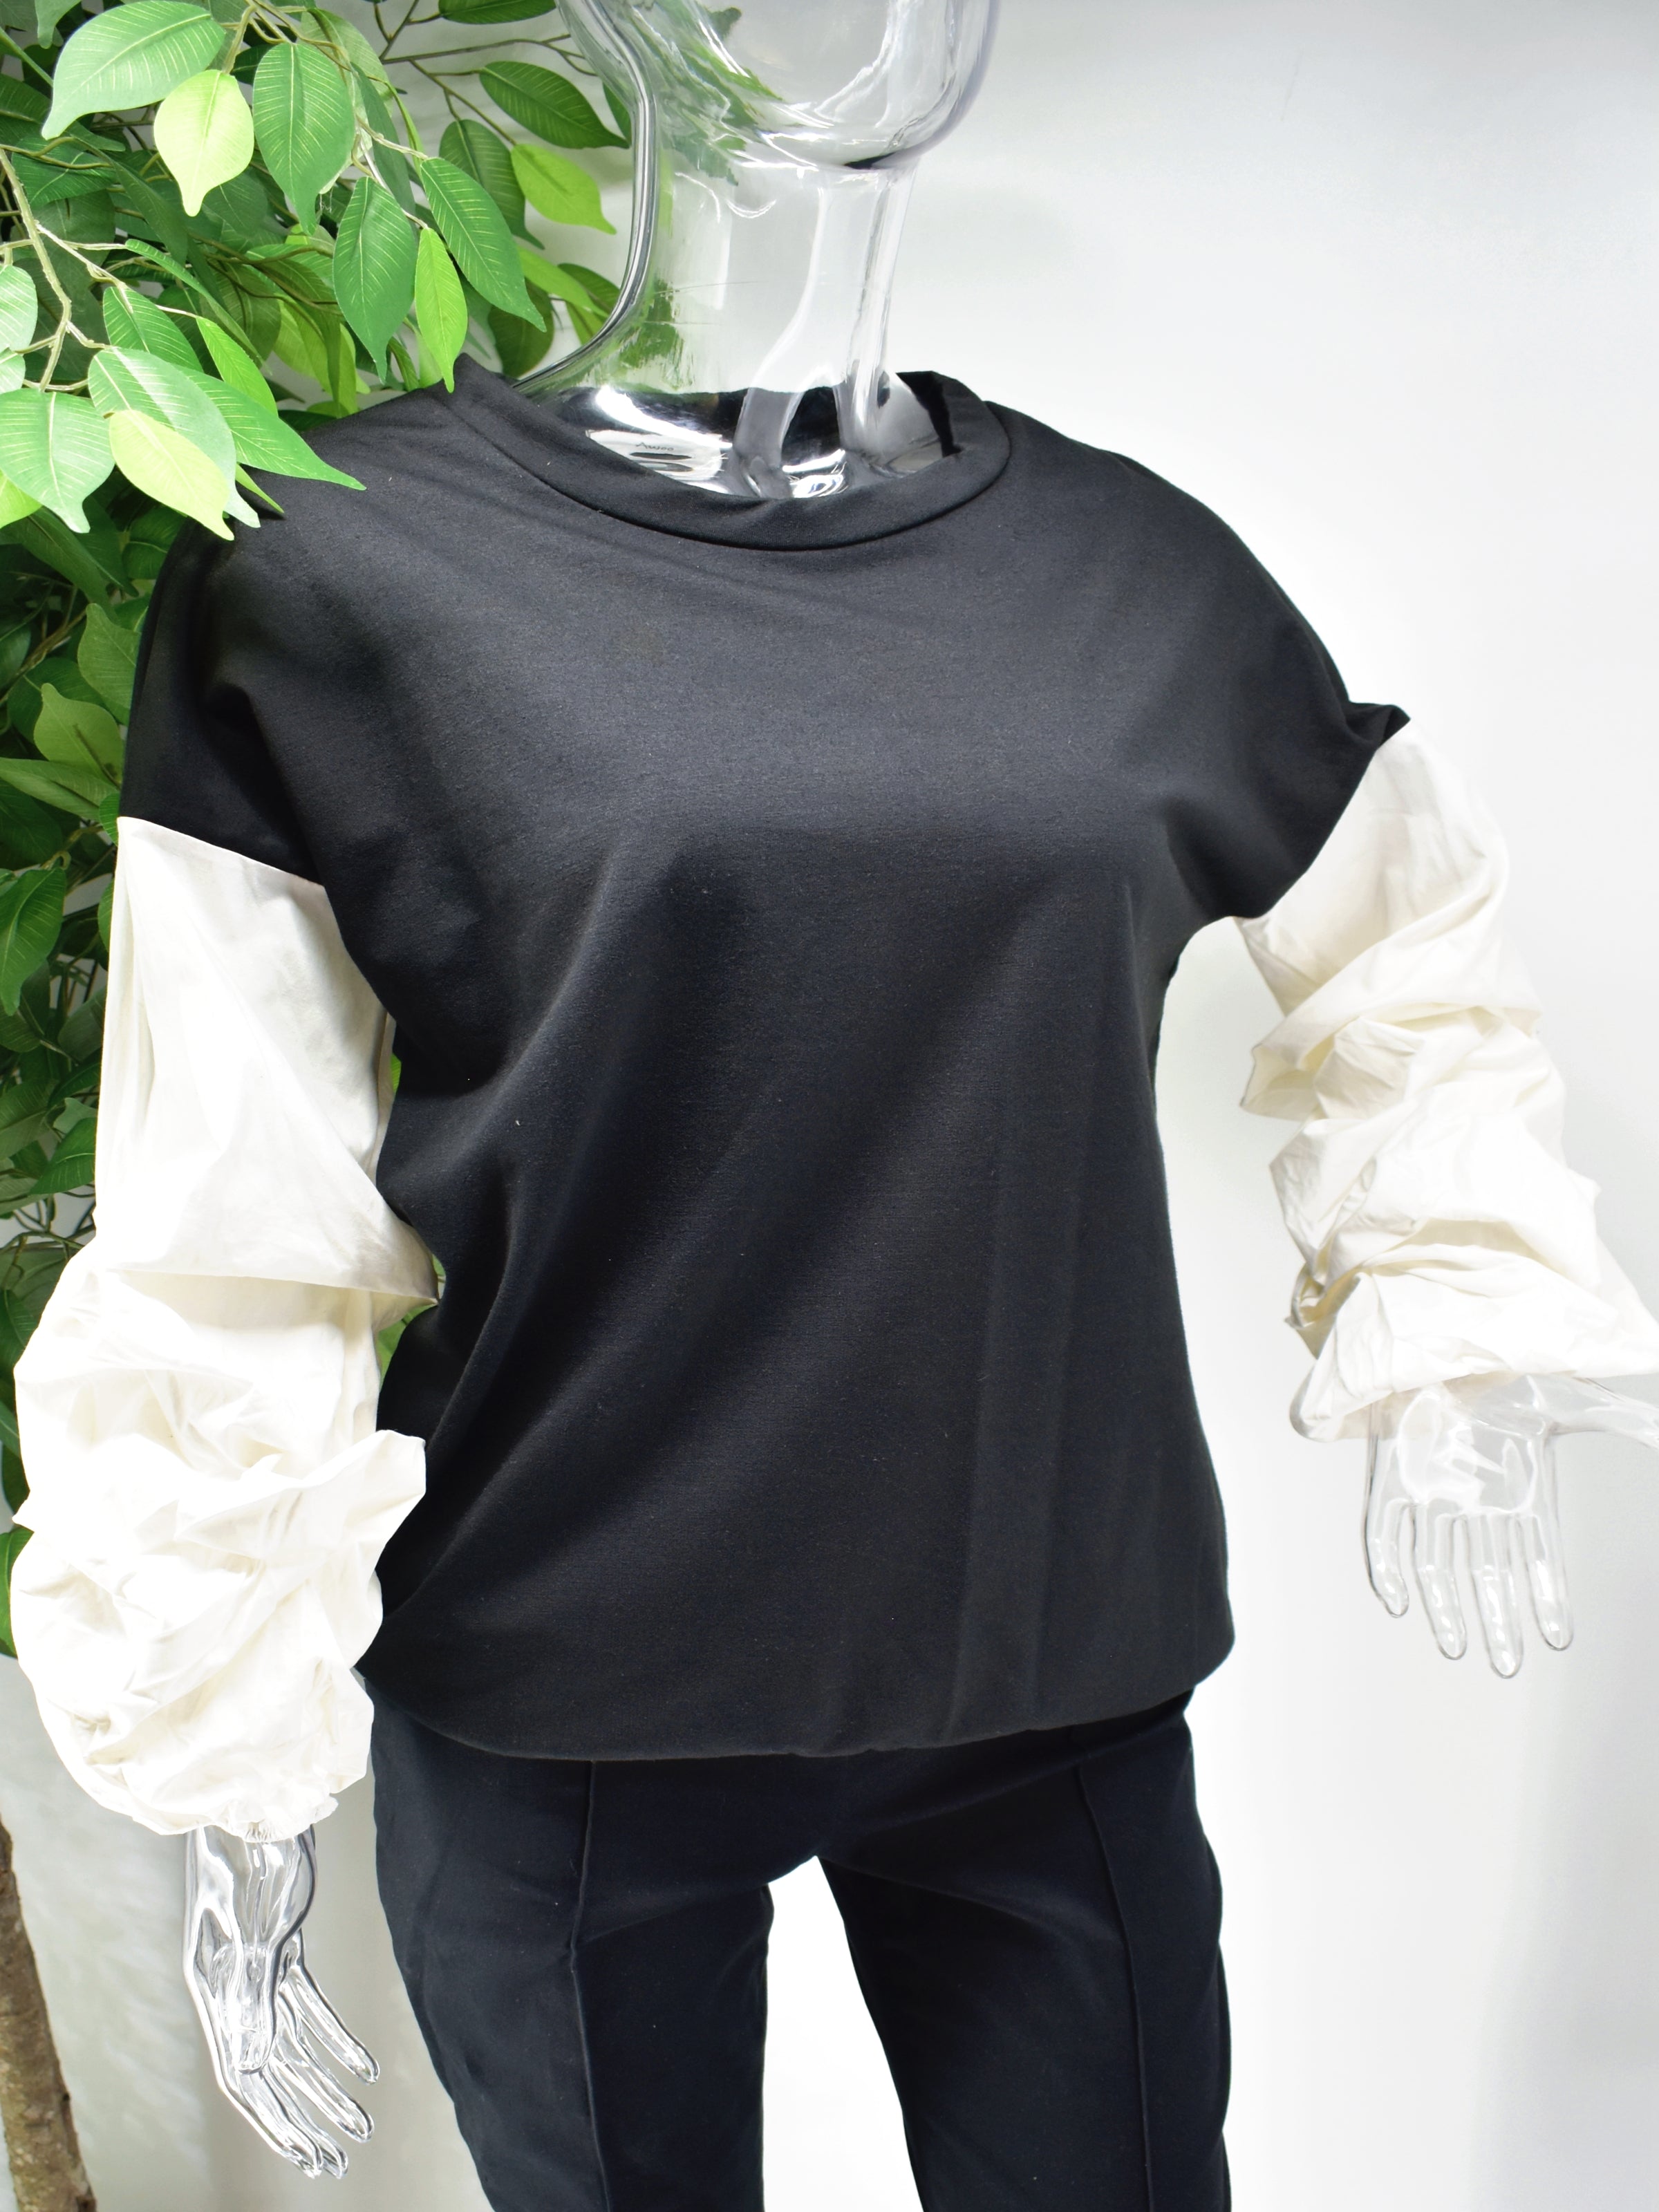 Let's Reinvent the sweater with our Bianey Black sweater top.  Our Bianey top is a black sweater top with a white puffed rouged sleeve.